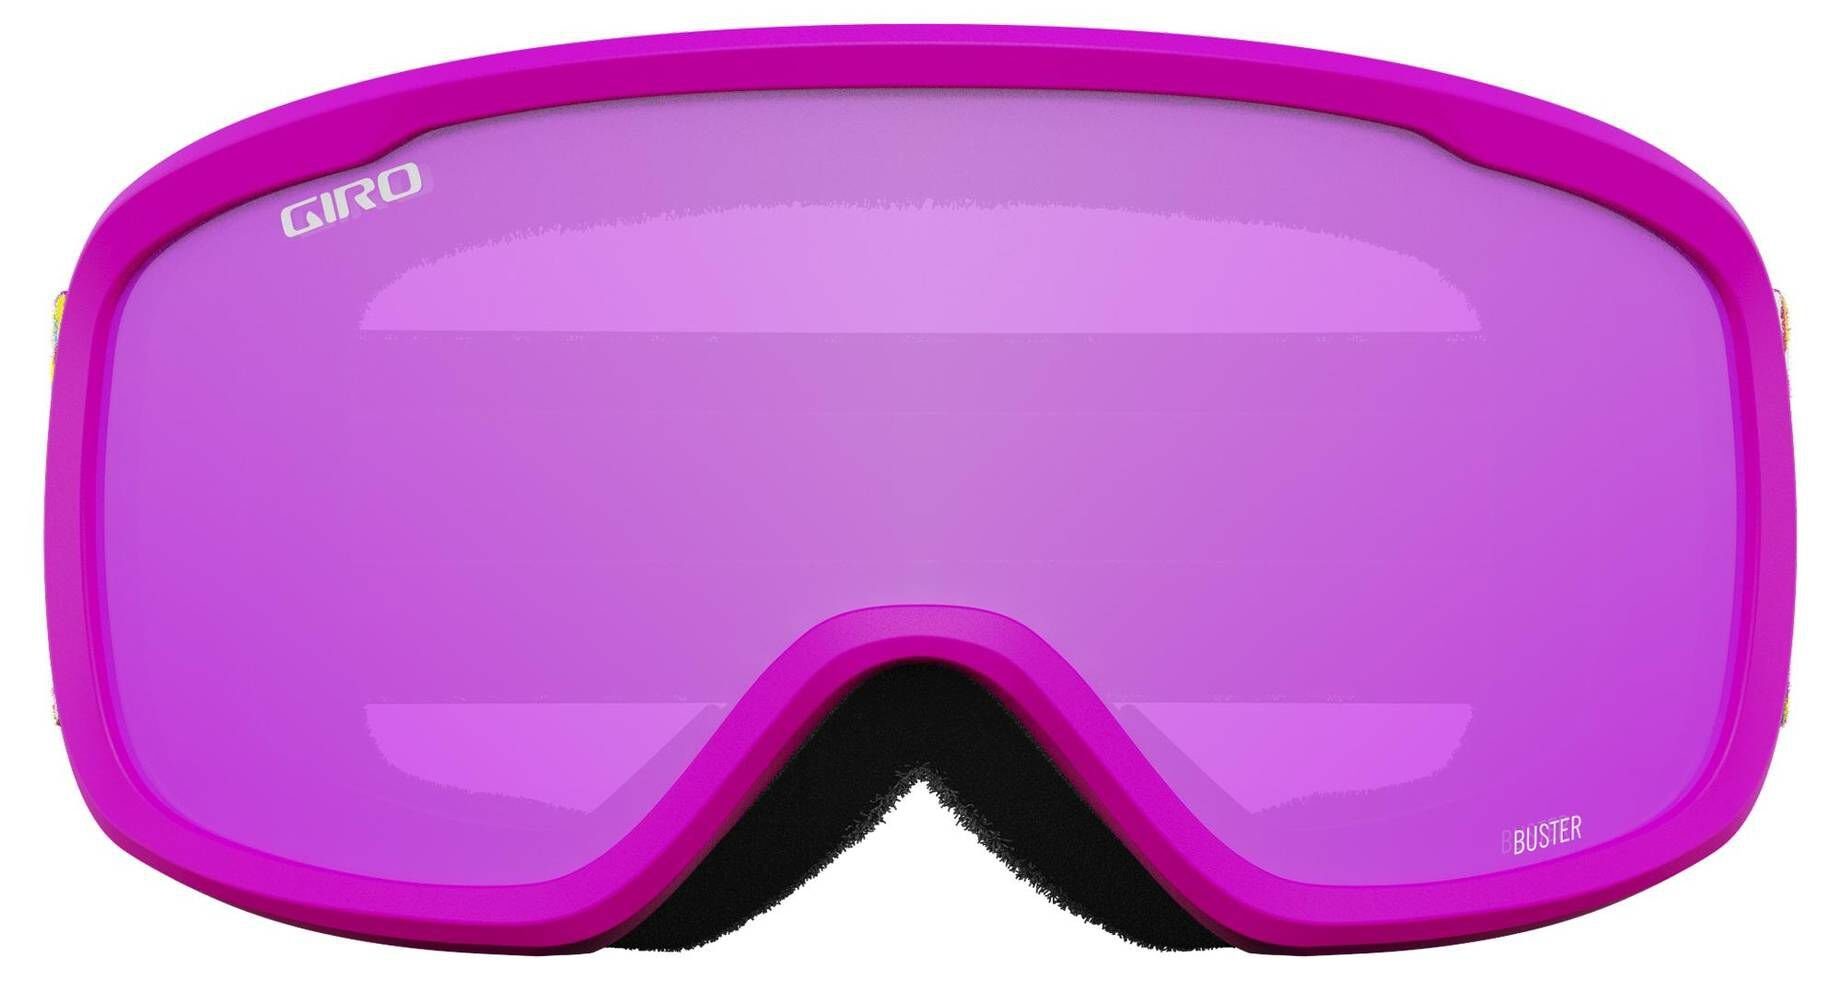 Giro Skibrille Kinder Skibrille BUSTER wollweiss (101) GOGGLE SNOW